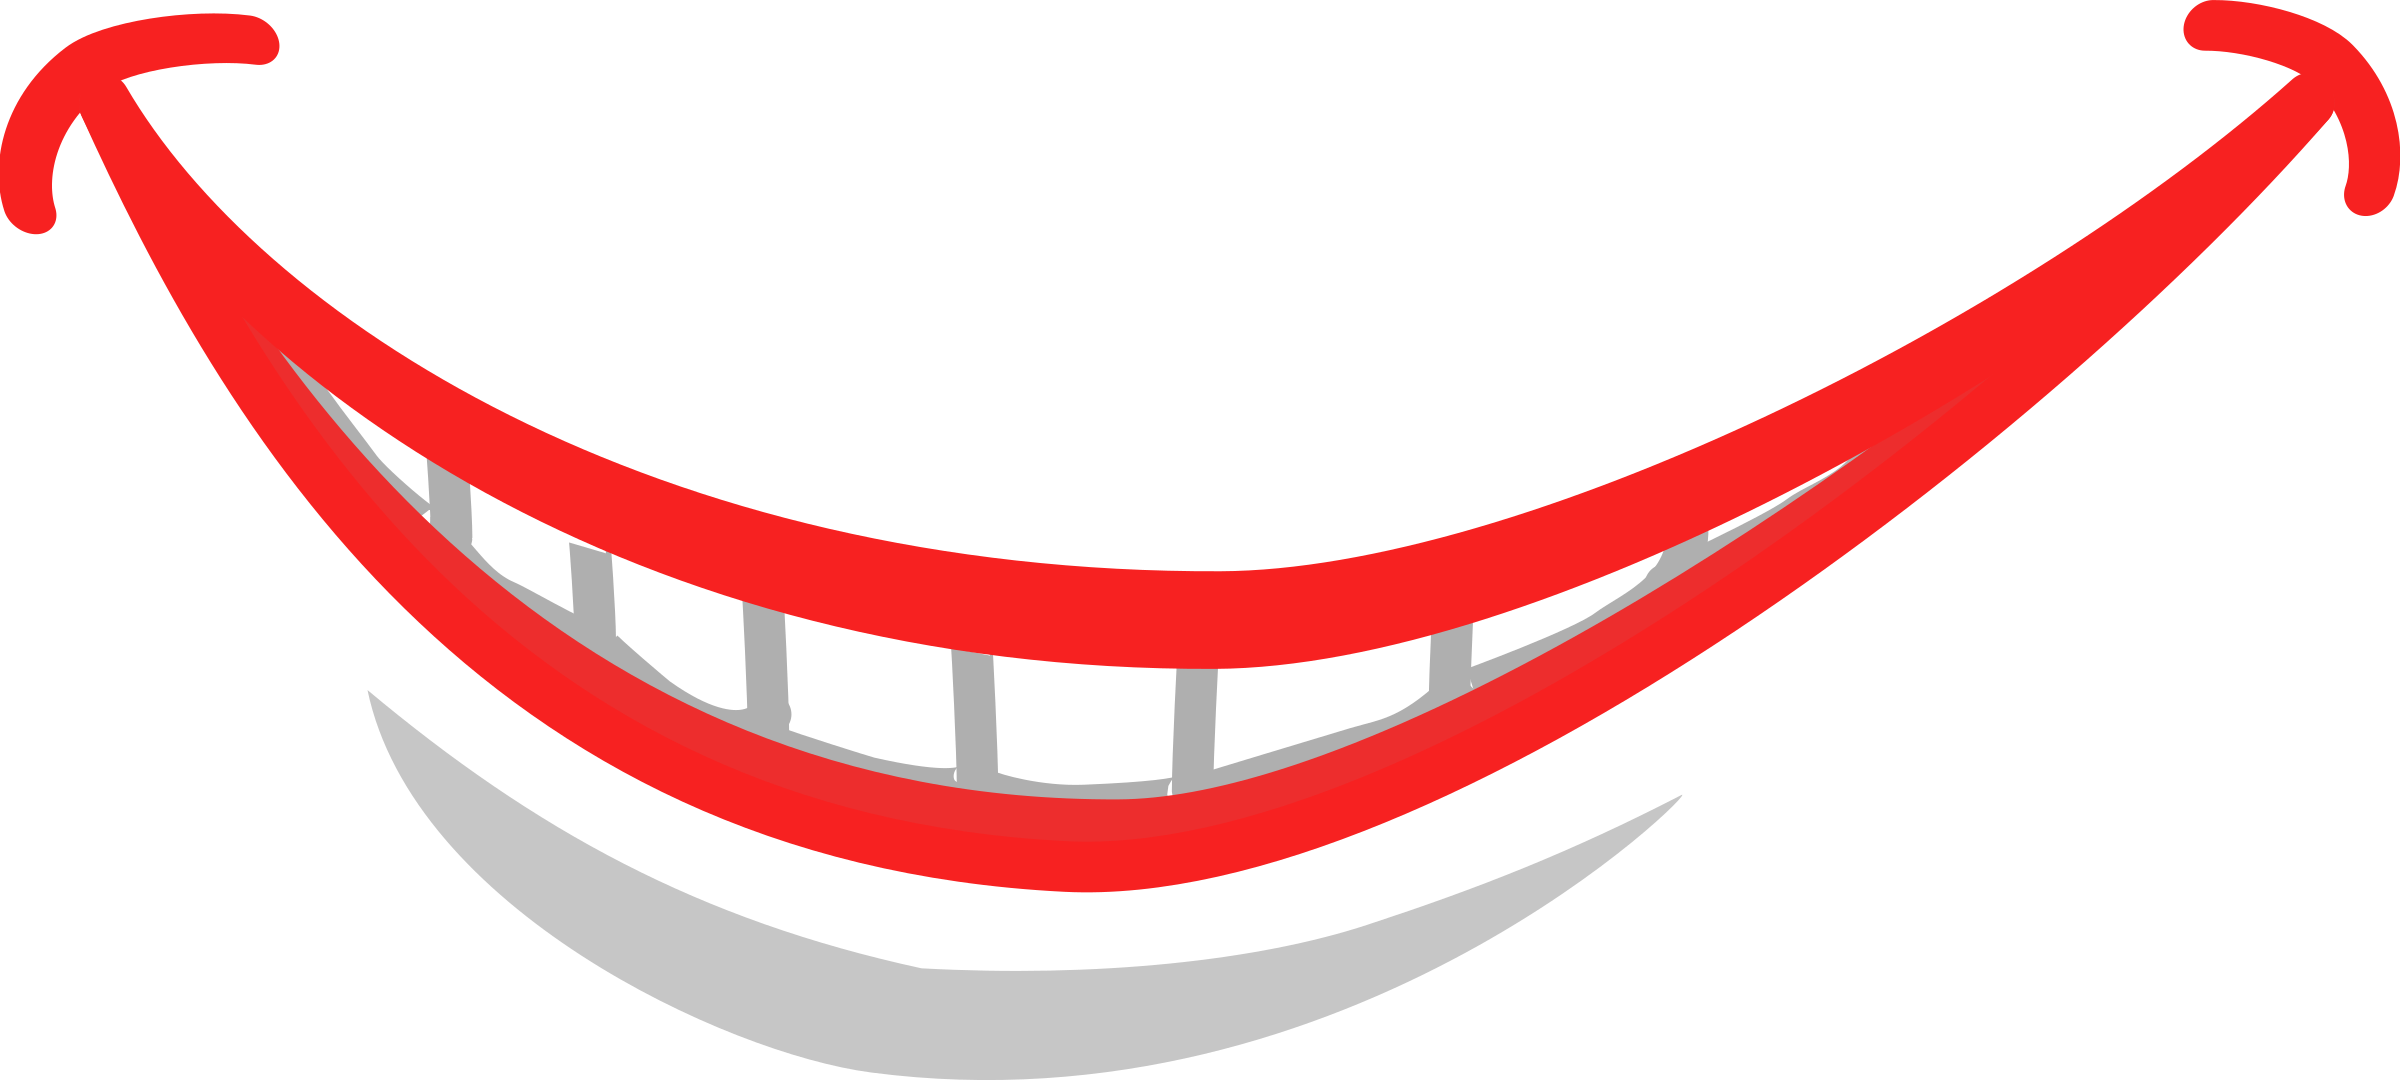 clipart smile with teeth - photo #4